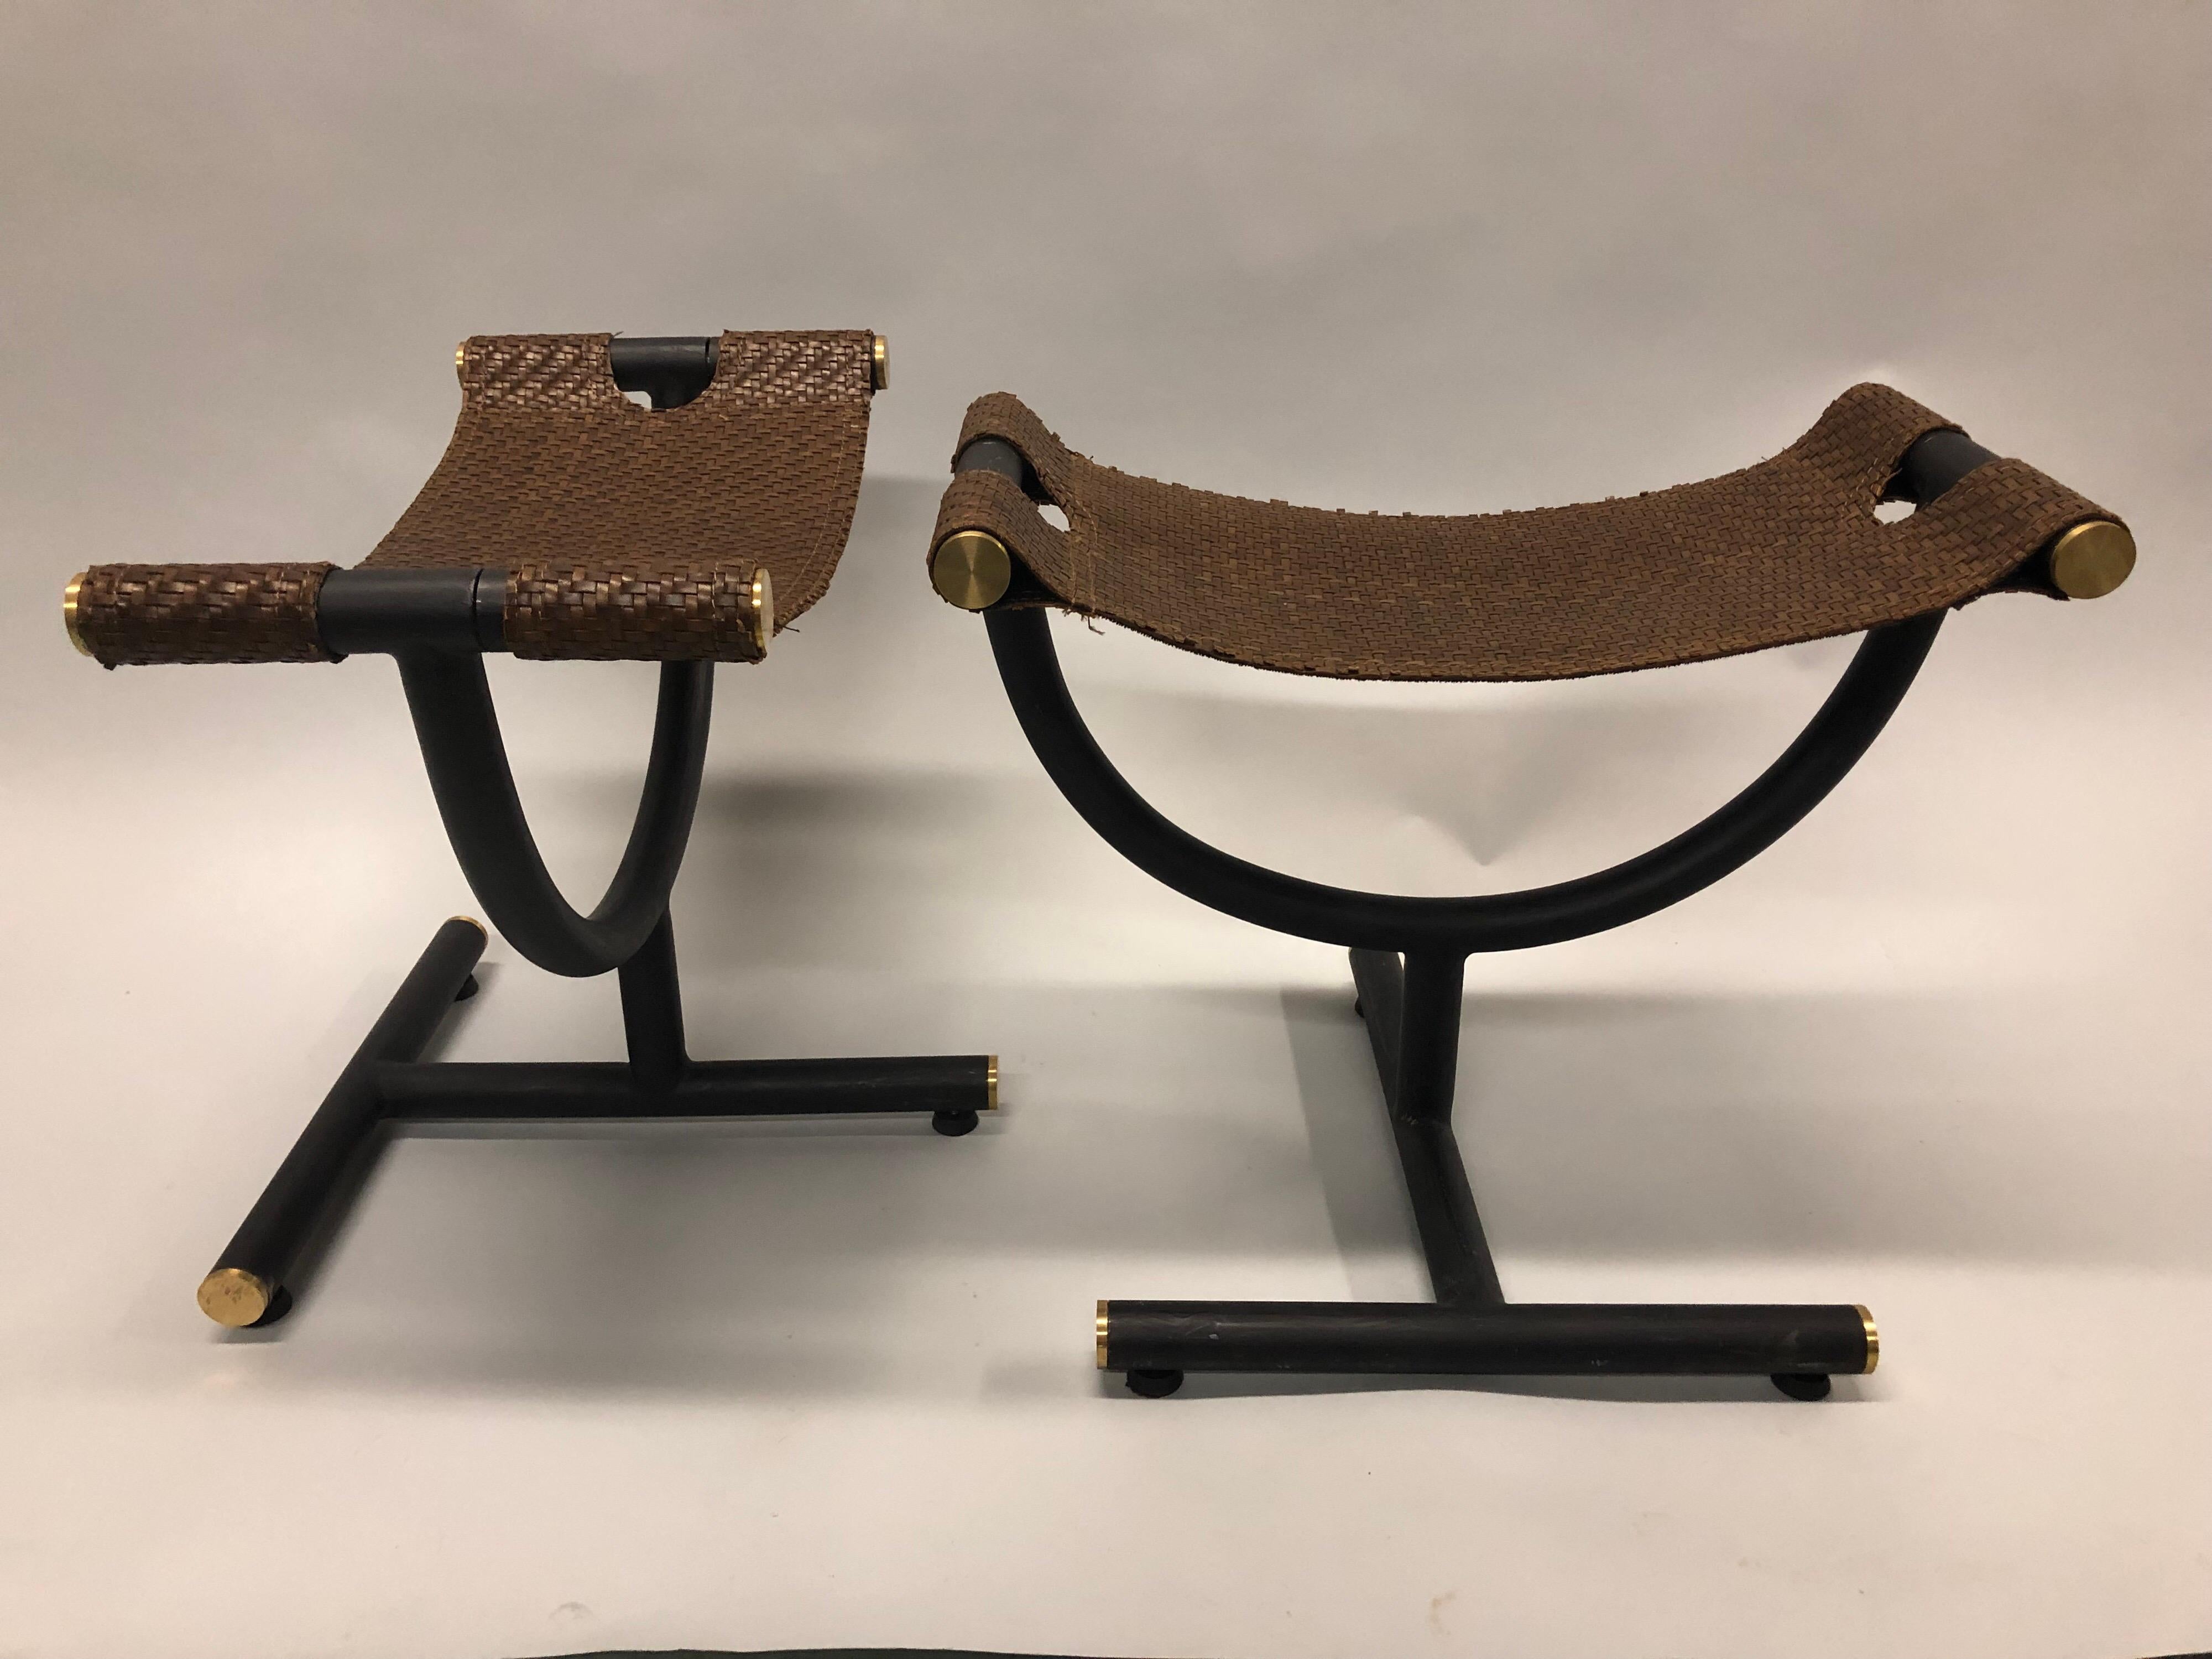 Elegant, custom pair of Italian late 20th century iron and braided leather benches / stools for Gucci
The braided leather seats are cantilevered over an open architectural framework composed of curves and angles and made of black enamel steel with